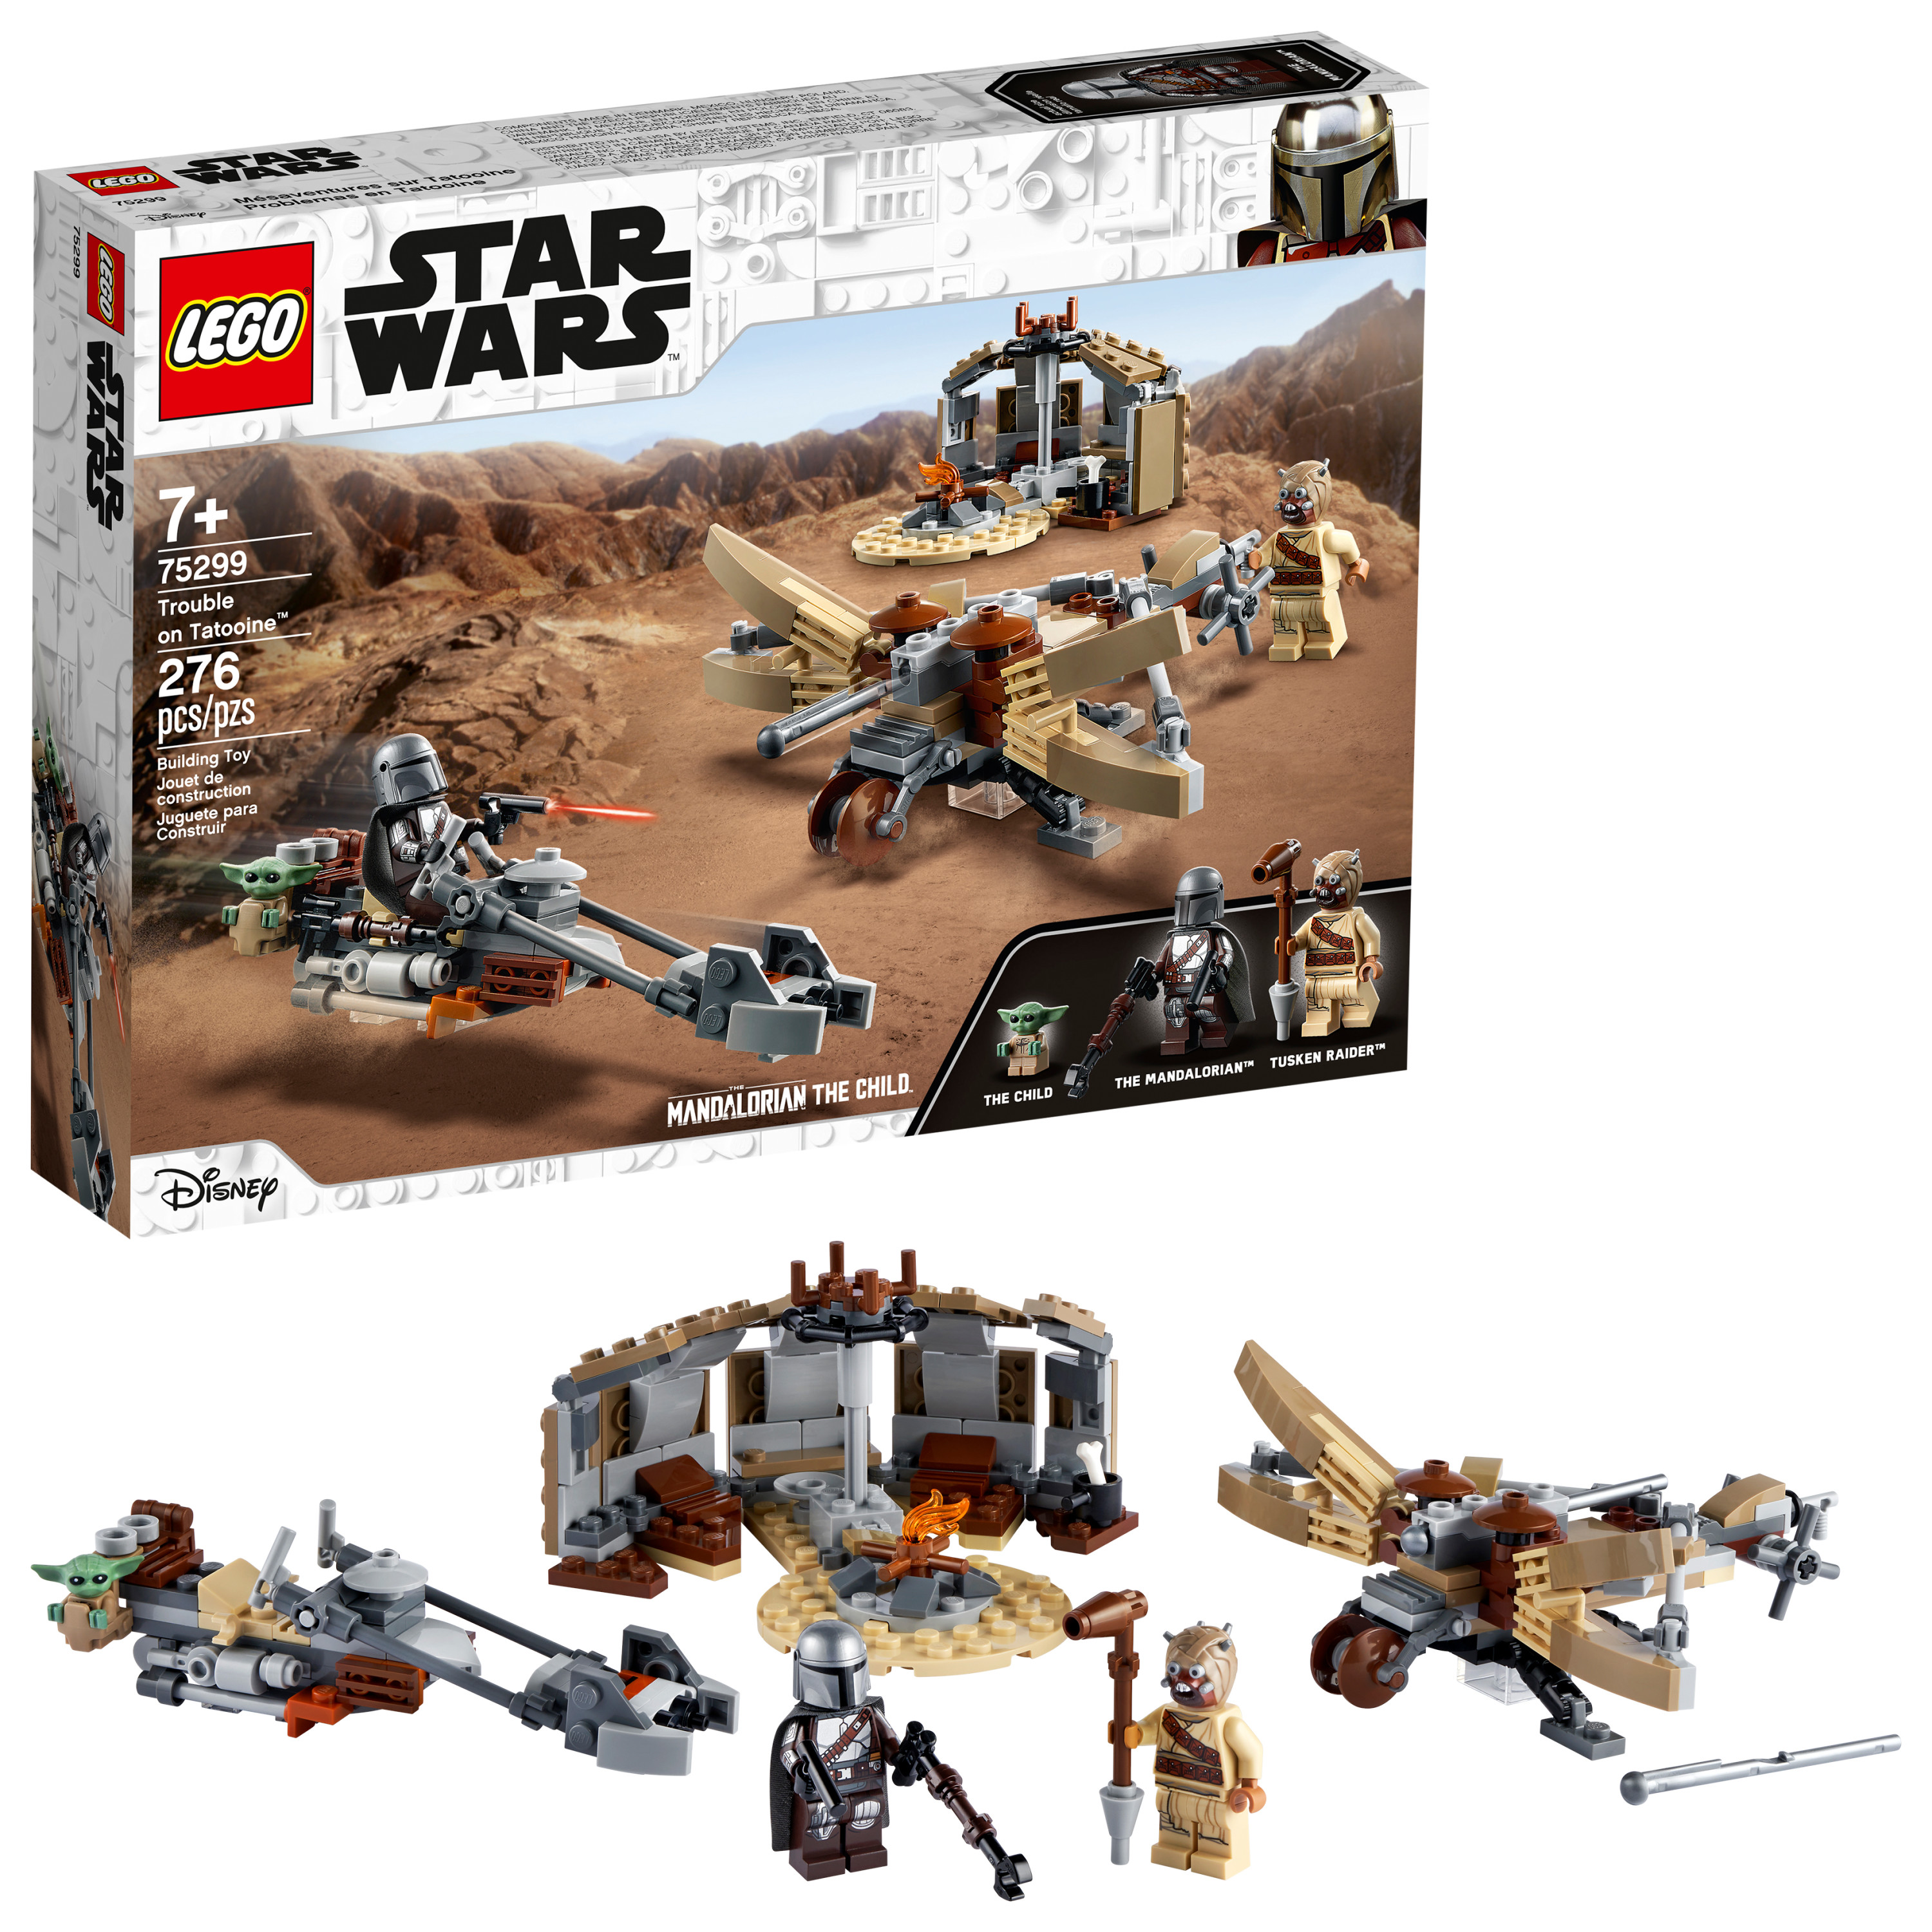 LEGO Star Wars: The Mandalorian Trouble on Tatooine 75299 Building Toy for Kids (276 Pieces) - Walmart.com $23.99